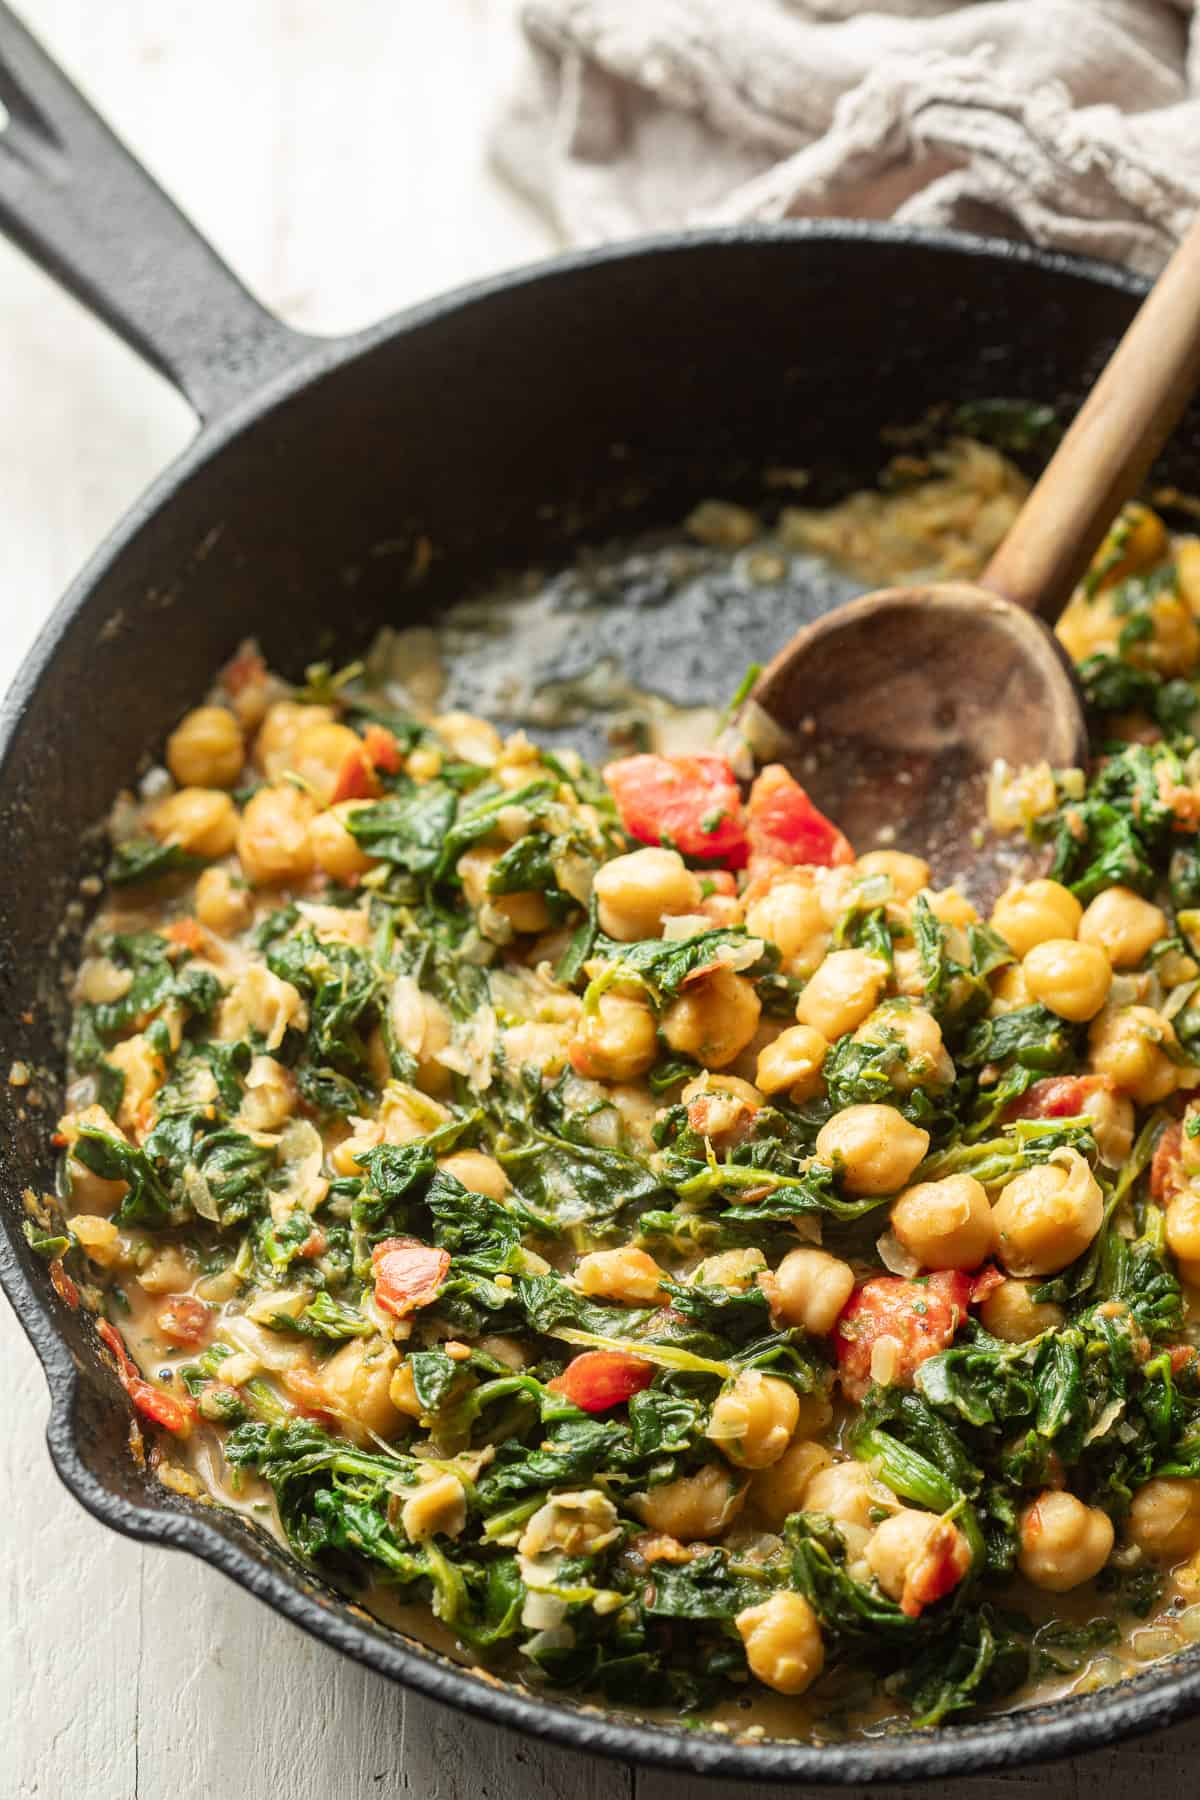 Skillet of Chickpea & Spinach Curry with a wooden spoon in it.